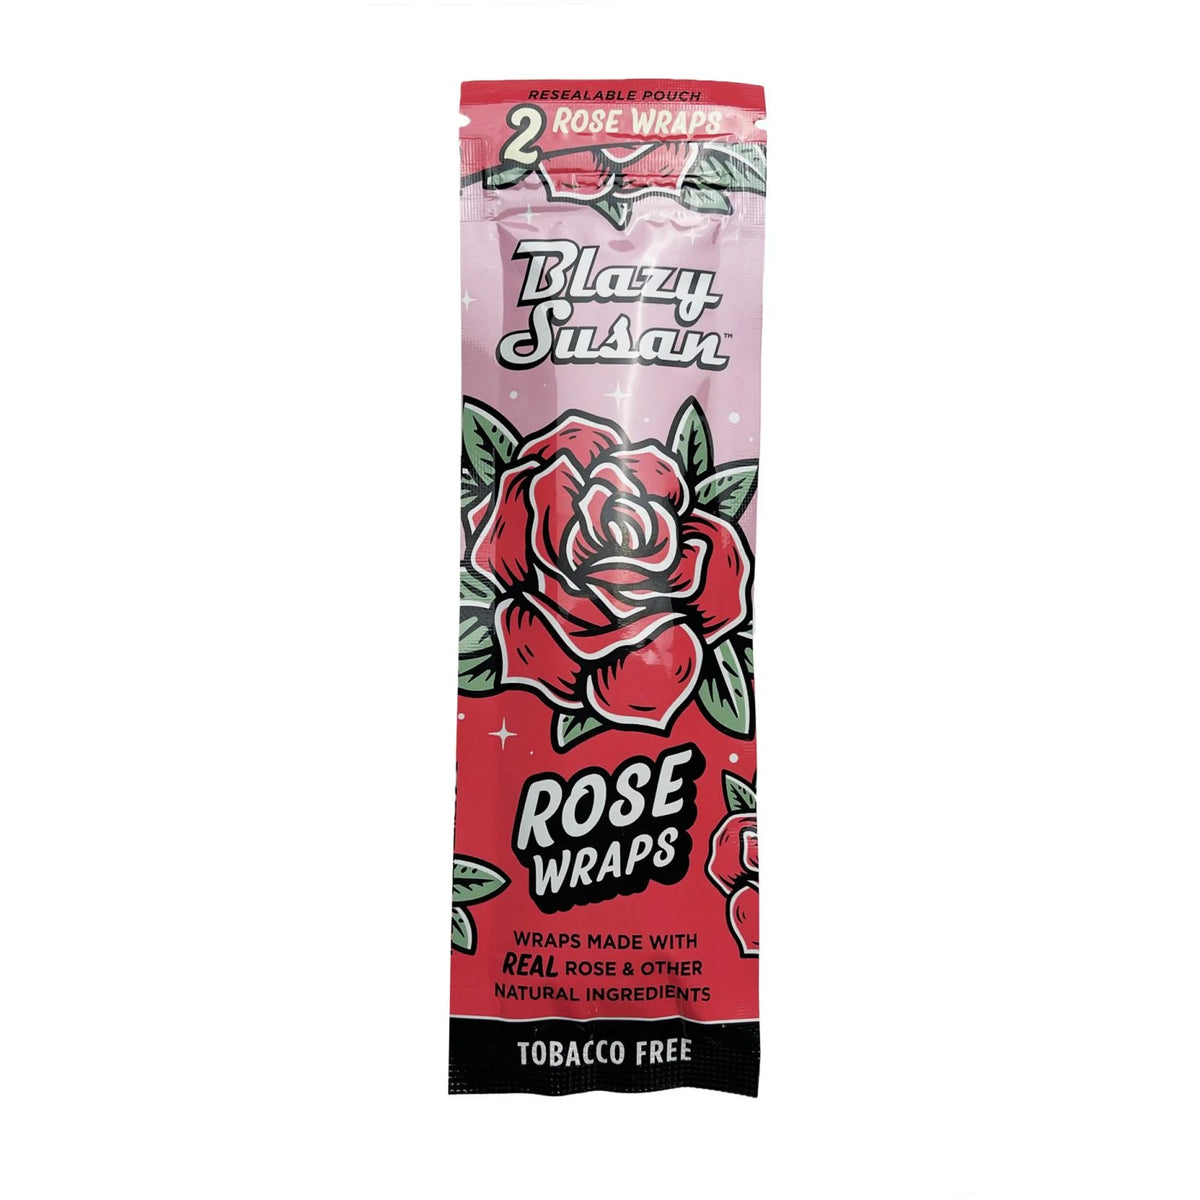 Rose Wraps 2 Pack by Blazy Susan